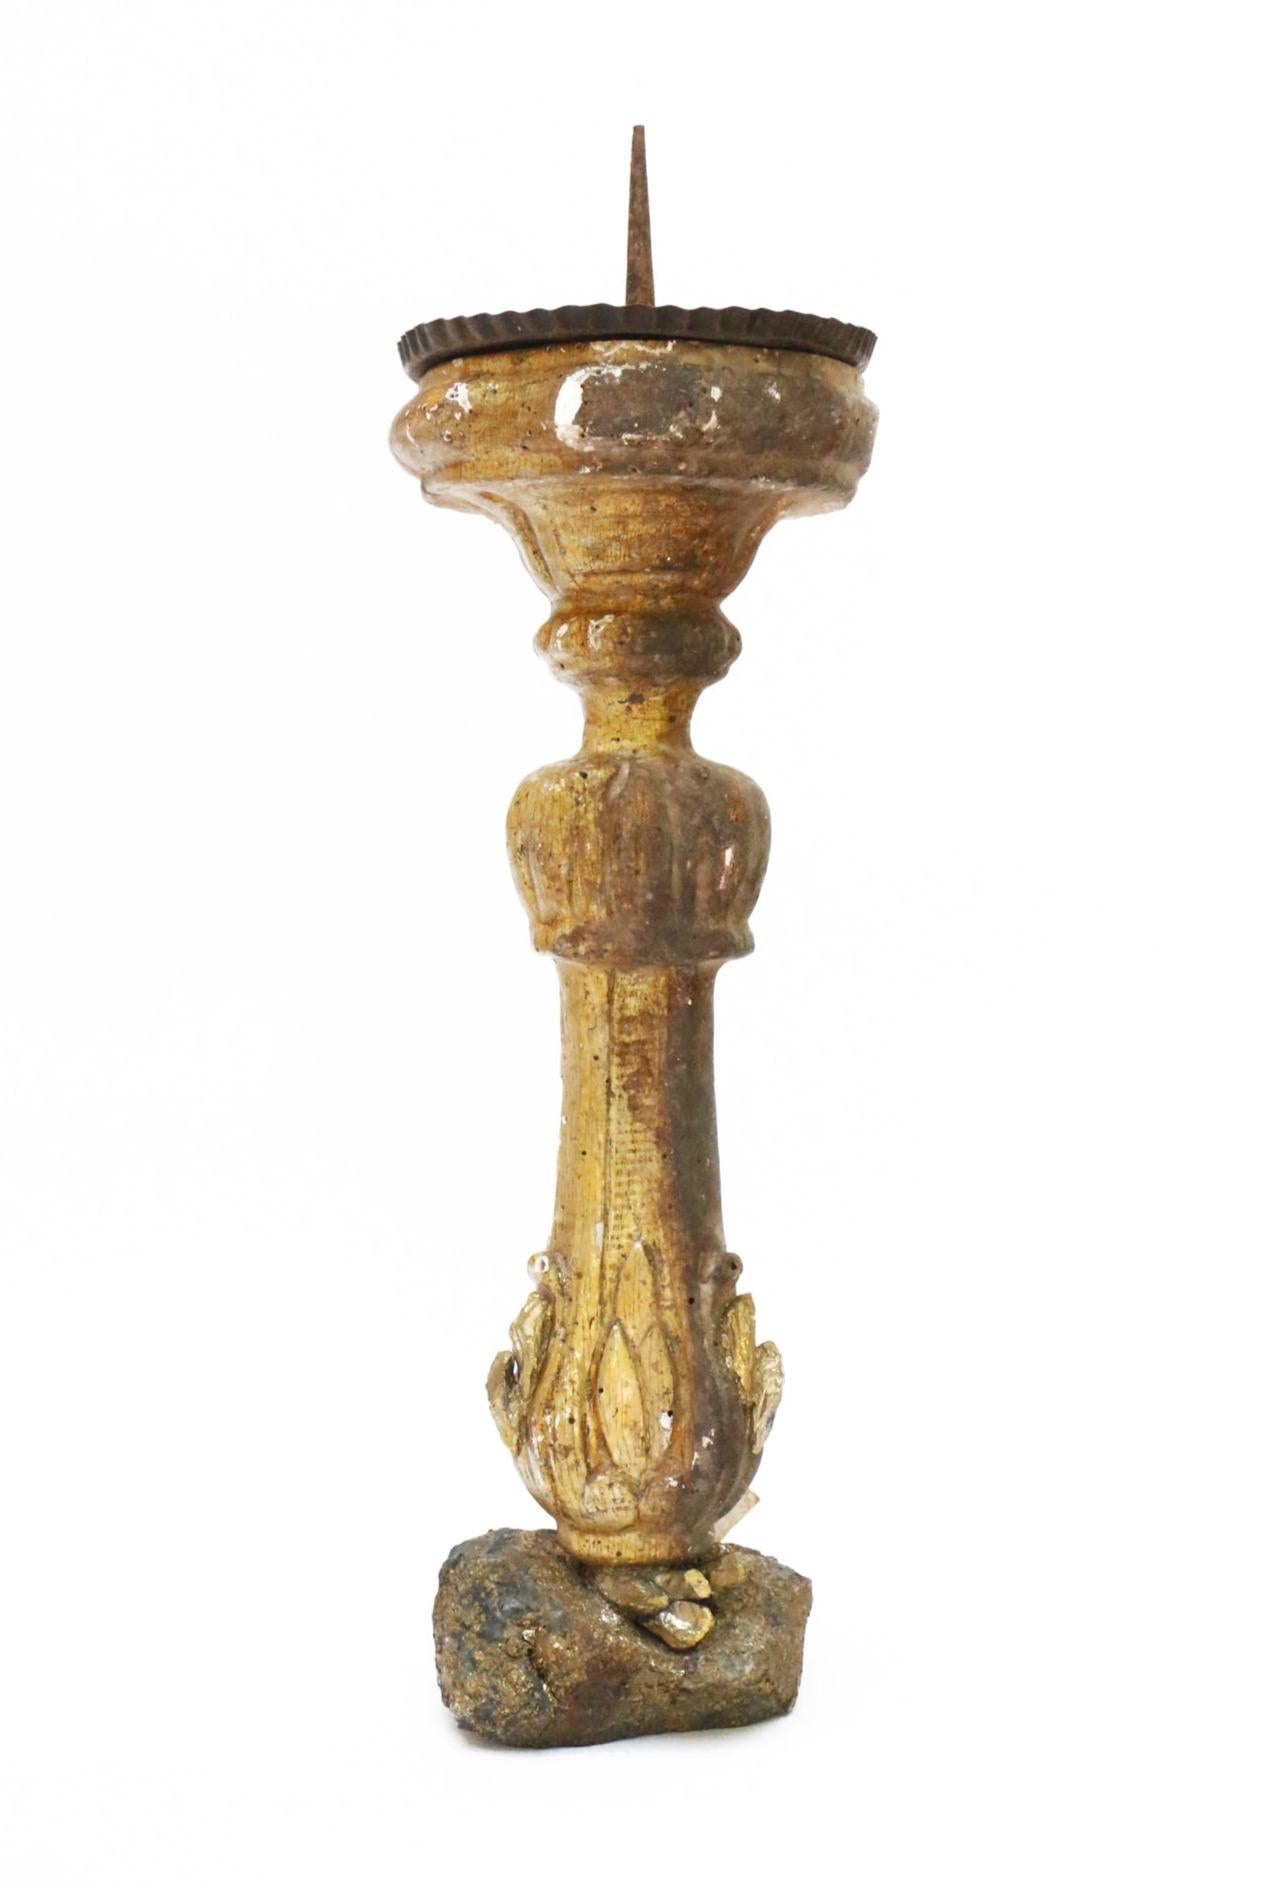 Sculptural 17th century Italian gilt candlestick mounted on chalcopyrite and adorned with gold-plated kyanite.

This fragment was originally part of a candlestick from a church in Italy. It is distressed from time but still has the original gold